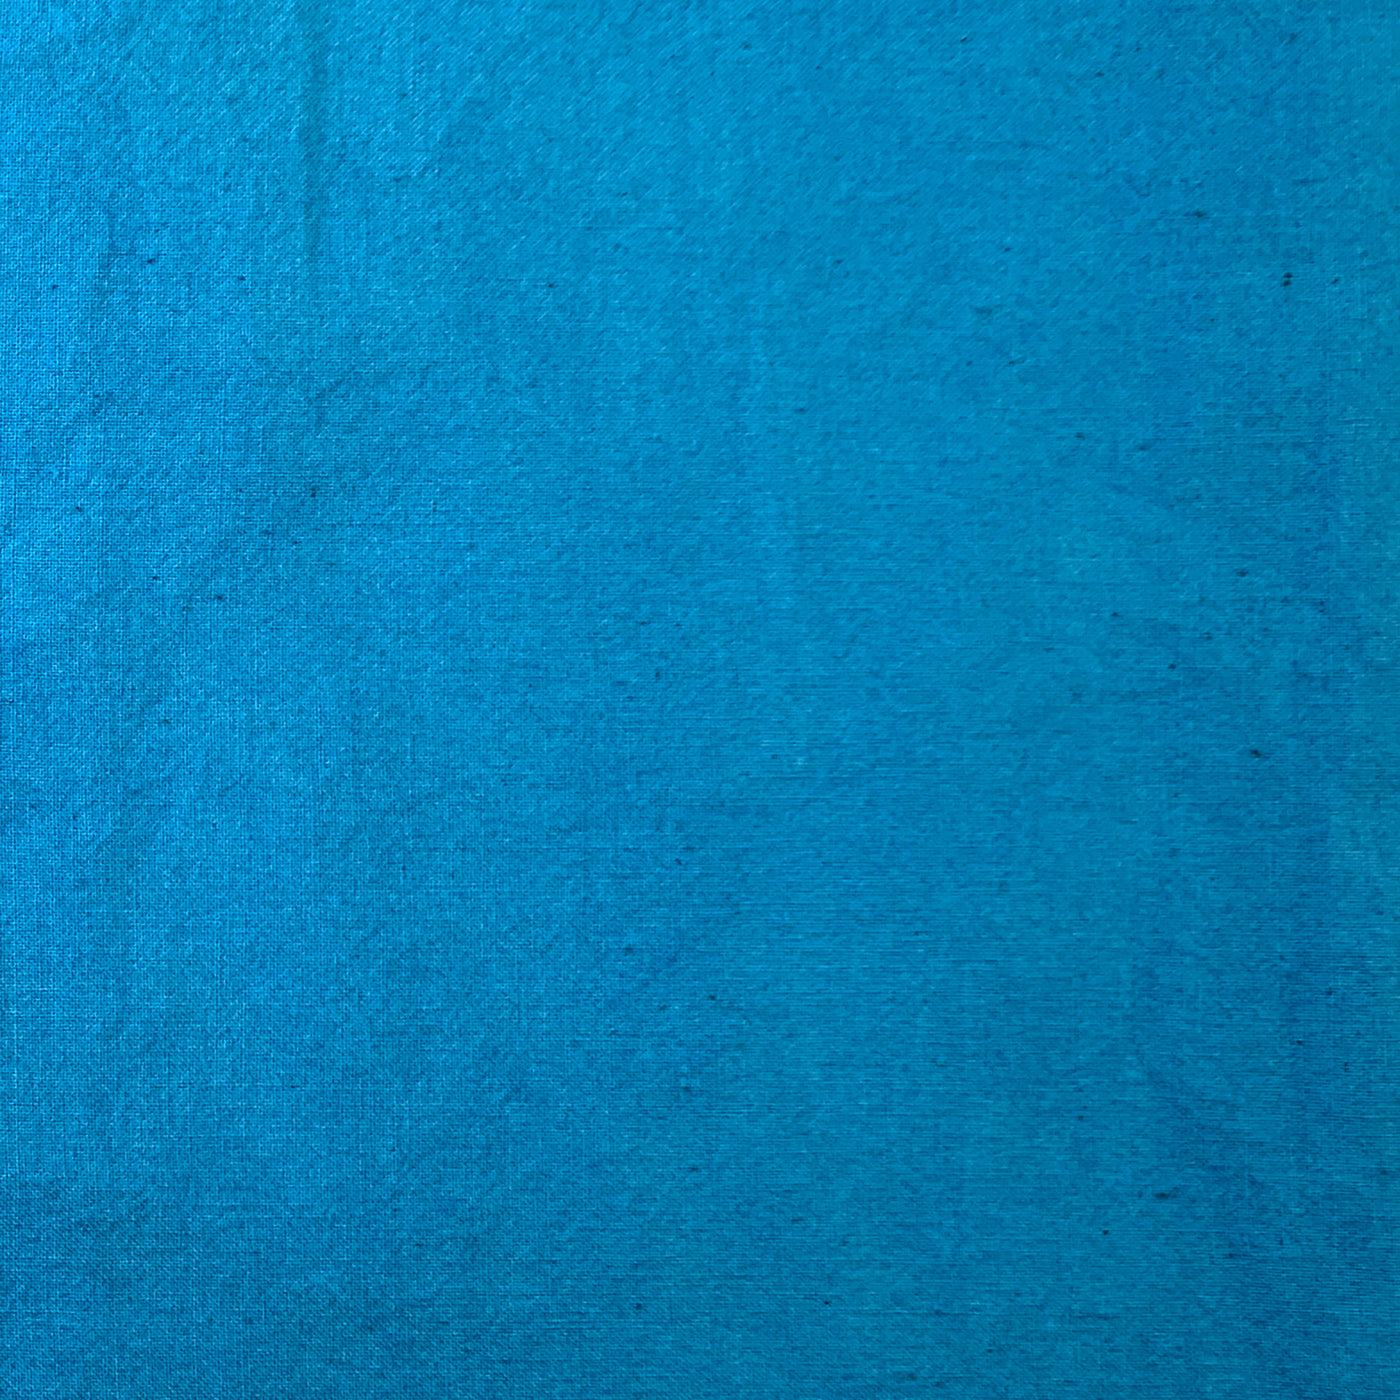 Cherrywood Hand Dyed Fabric - Turquoise 0860